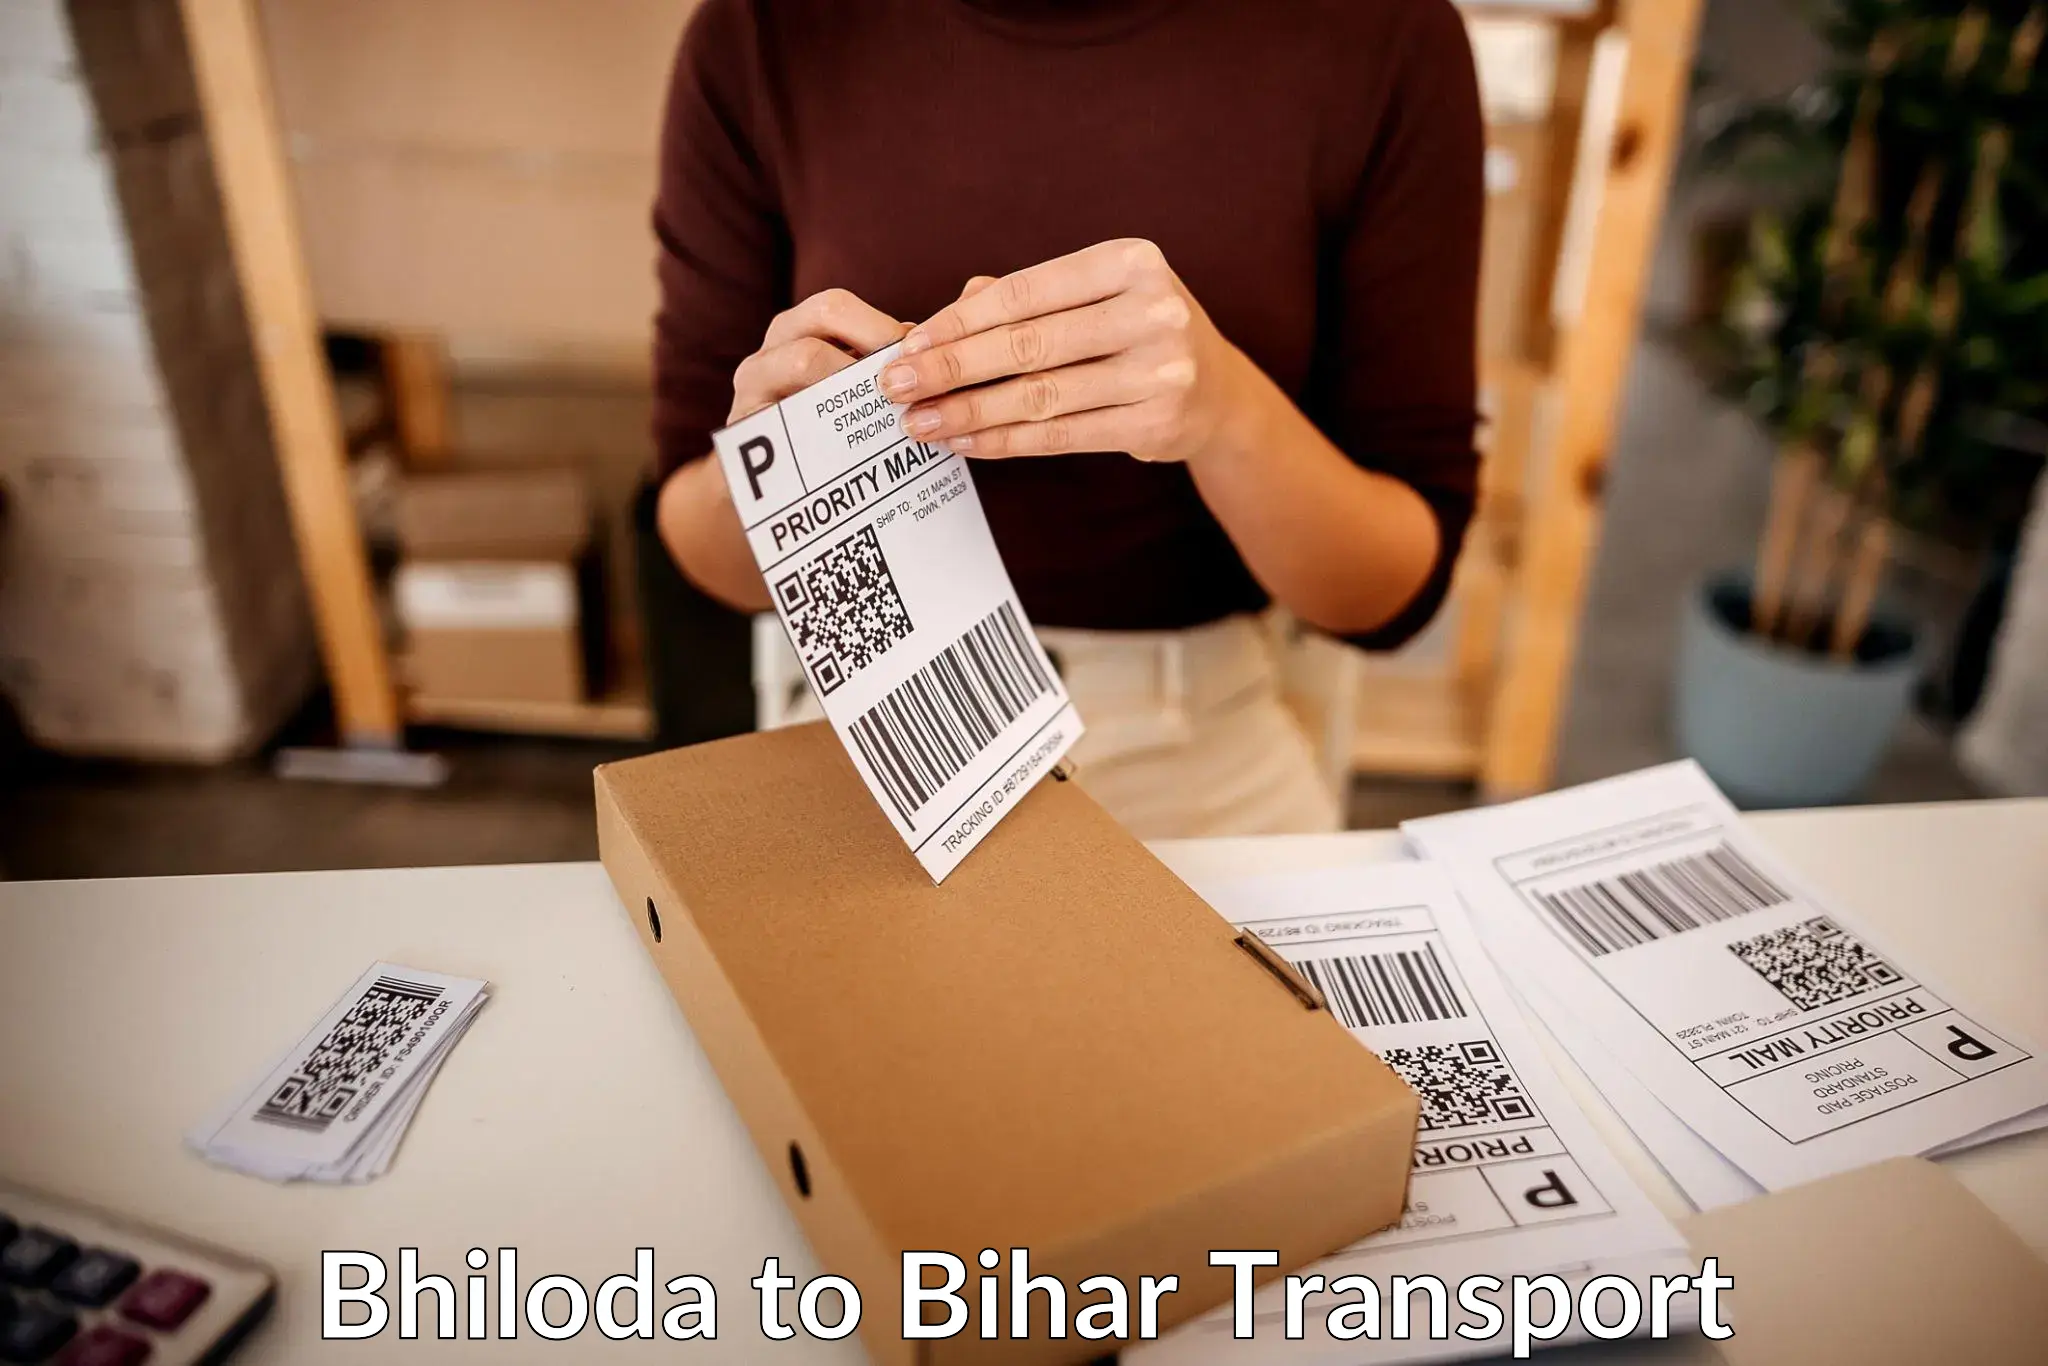 Shipping services Bhiloda to Kamtaul